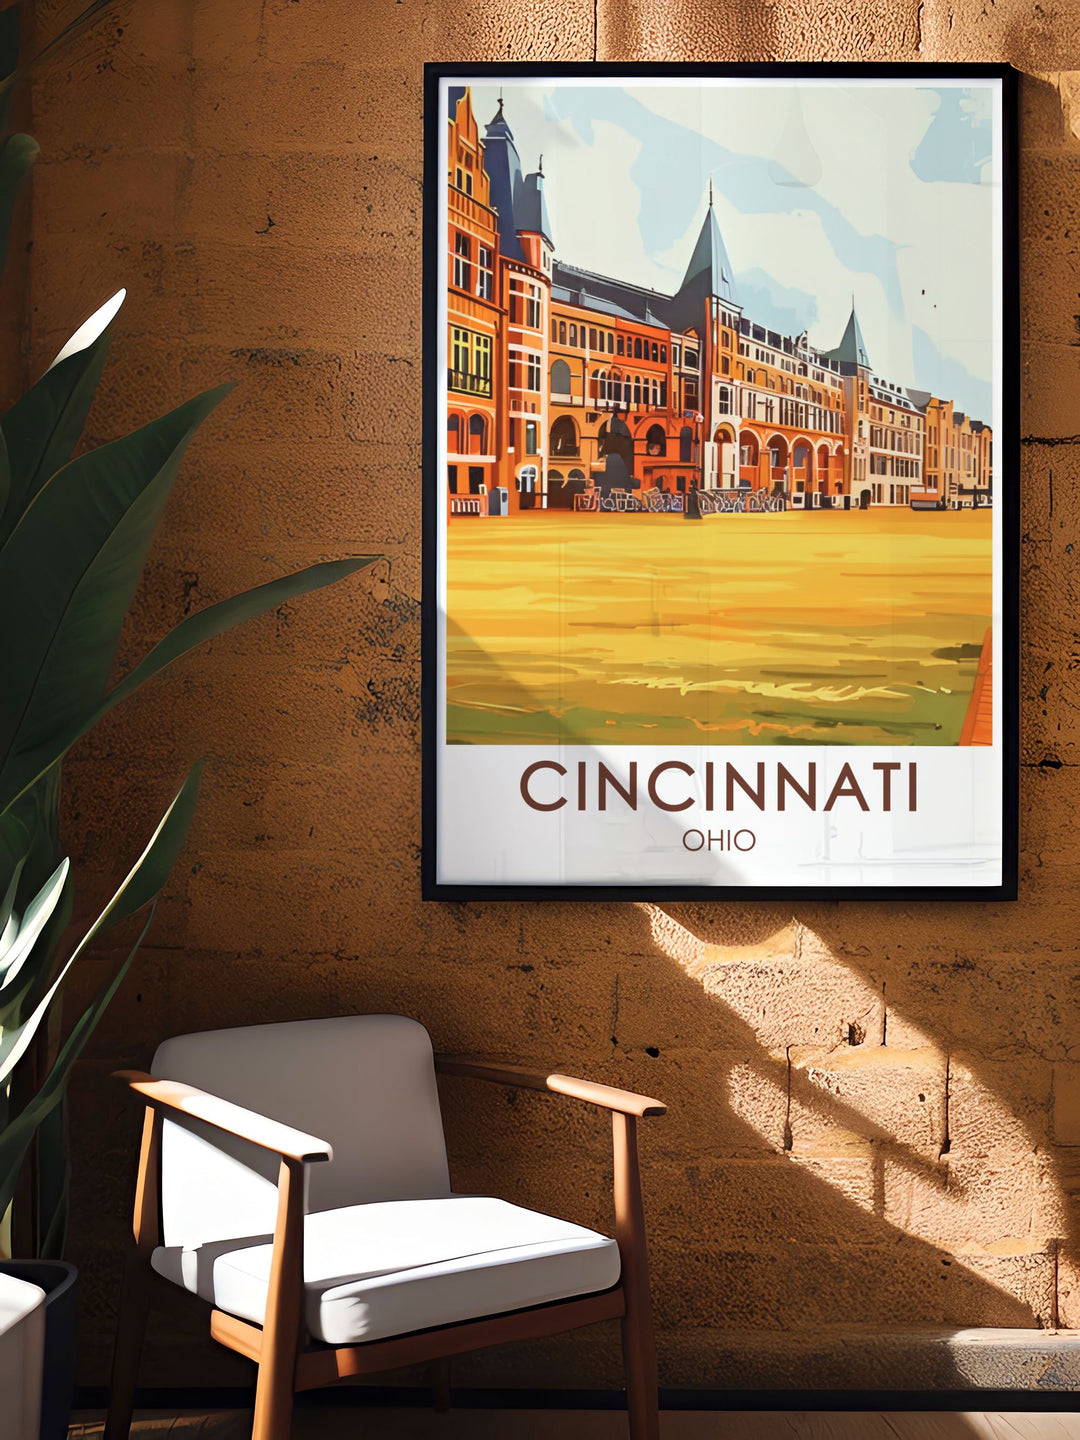 This Cincinnati poster brings the dynamic energy of the citys Music Hall to life. A perfect addition for those who appreciate historical landmarks and vibrant arts scenes.